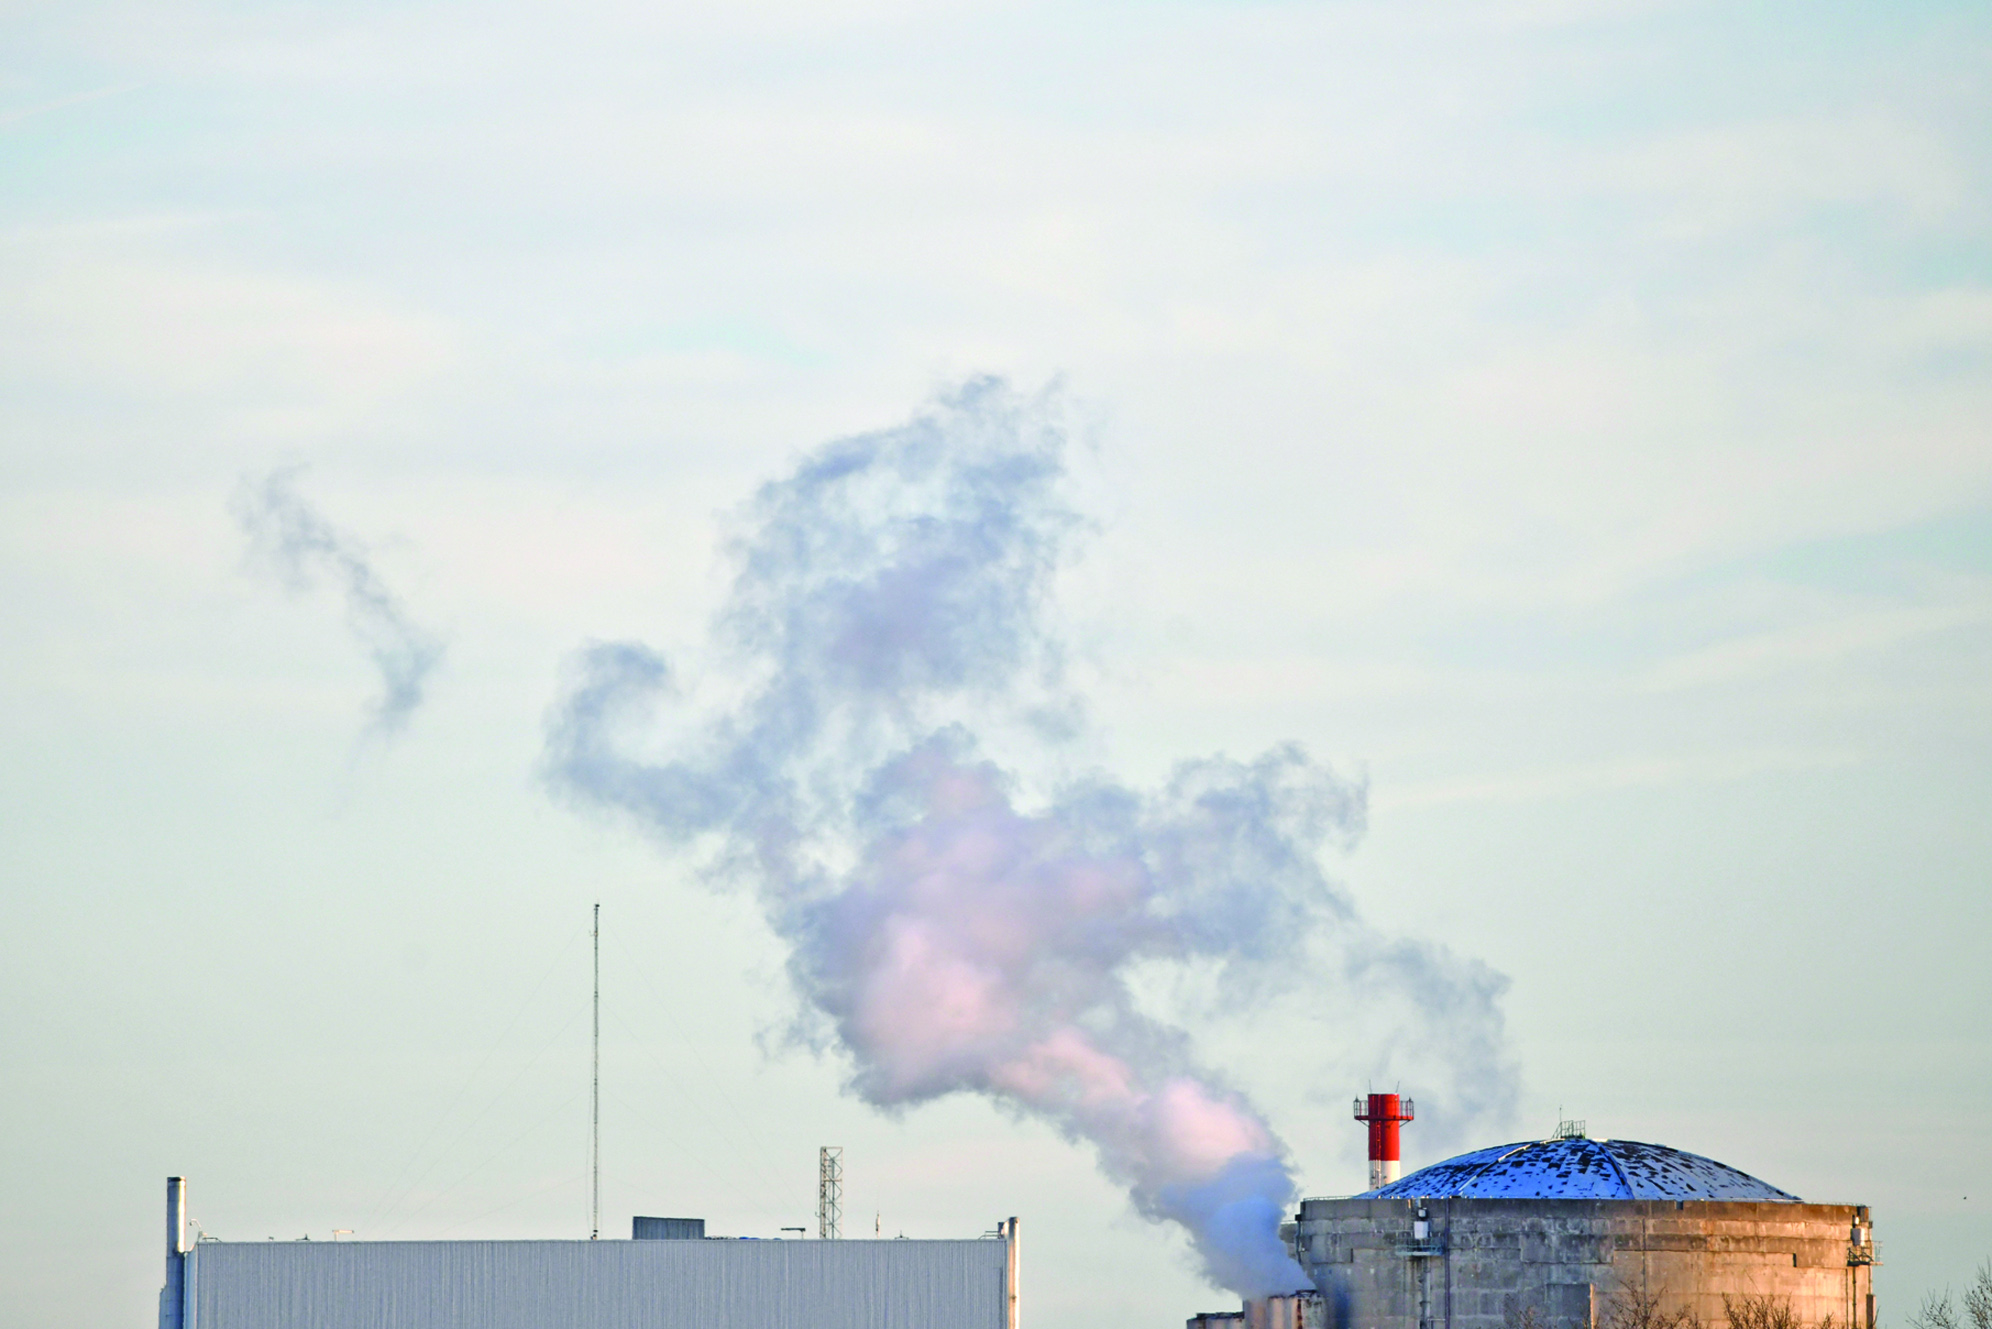 Smoke rises from the Fessenheim nuclear powerplant in Fessenheim, eastern France, on February 22, 2020, following the closing of the first of the two reactors of the Fessenheim power plant overnight. - France started to close its oldest atomic power plant on early February 22 after 43 years in operation, the first in a series of reactor shutdowns but hardly a signal the country will reduce its reliance on nuclear energy anytime soon. Unplugging the two reactors at Fessenheim, along the Rhine near France's eastern border with Germany and Switzerland, became a key goal of anti-nuclear campaigners after the catastrophic meltdown at Fukushima in Japan in 2011. The first reactor was shut down on early February 22 and the second will be closed on June 30, though it will be several months before they go cold and the used fuel can start to be removed. (Photo by SEBASTIEN BOZON / AFP)